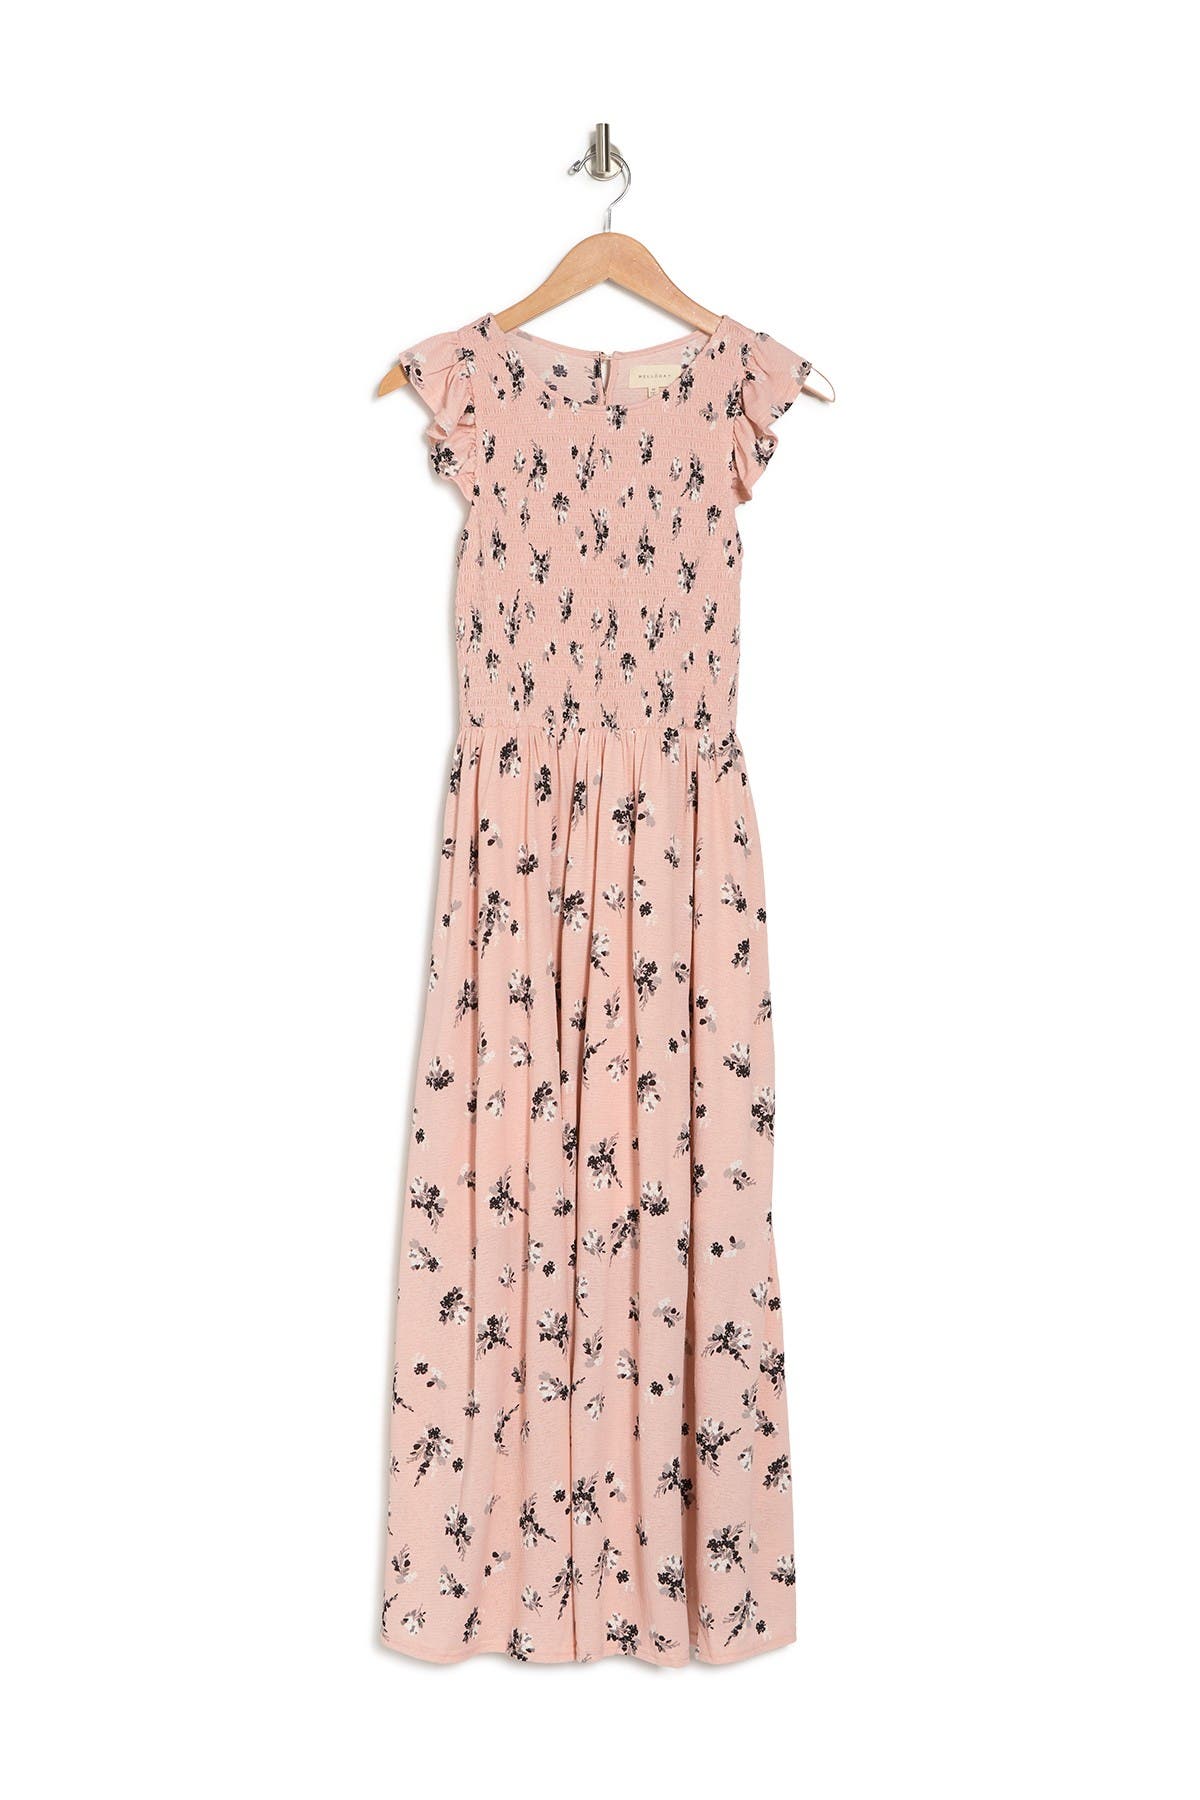 Melloday Sleeveless Floral Print Smocked Top Knit Midi Dress In Pink Floral